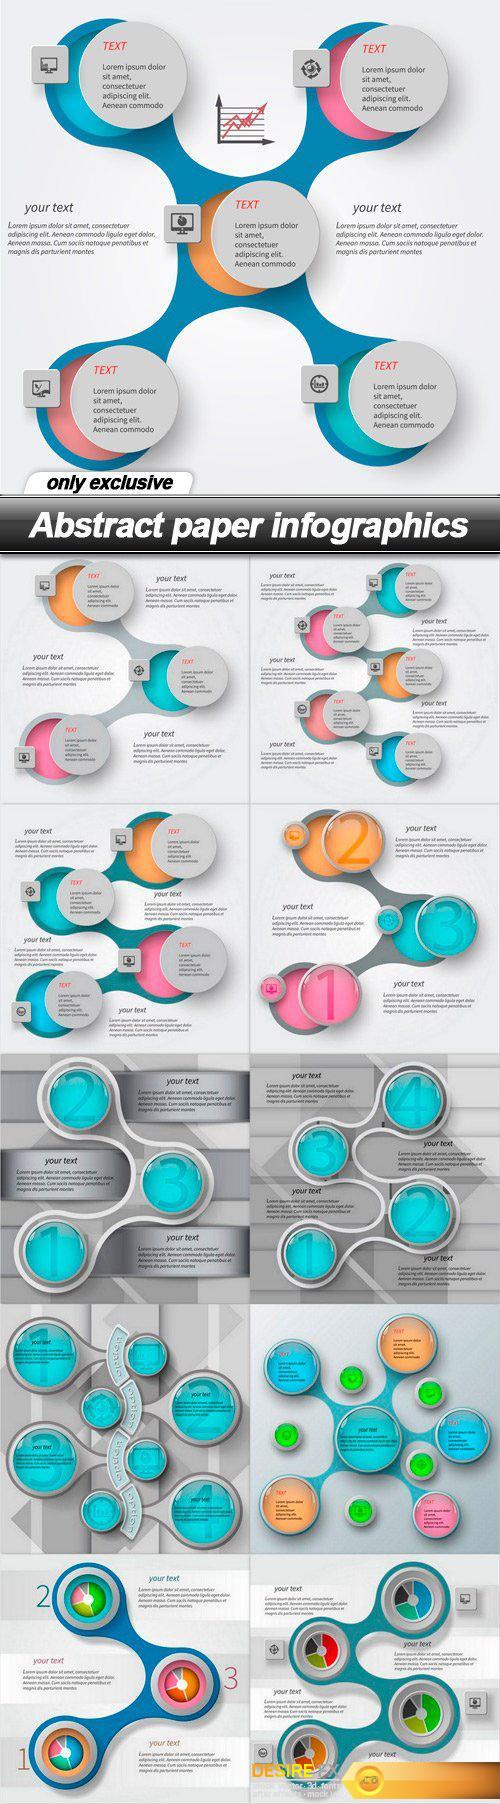 Abstract paper infographics - 11 EPS